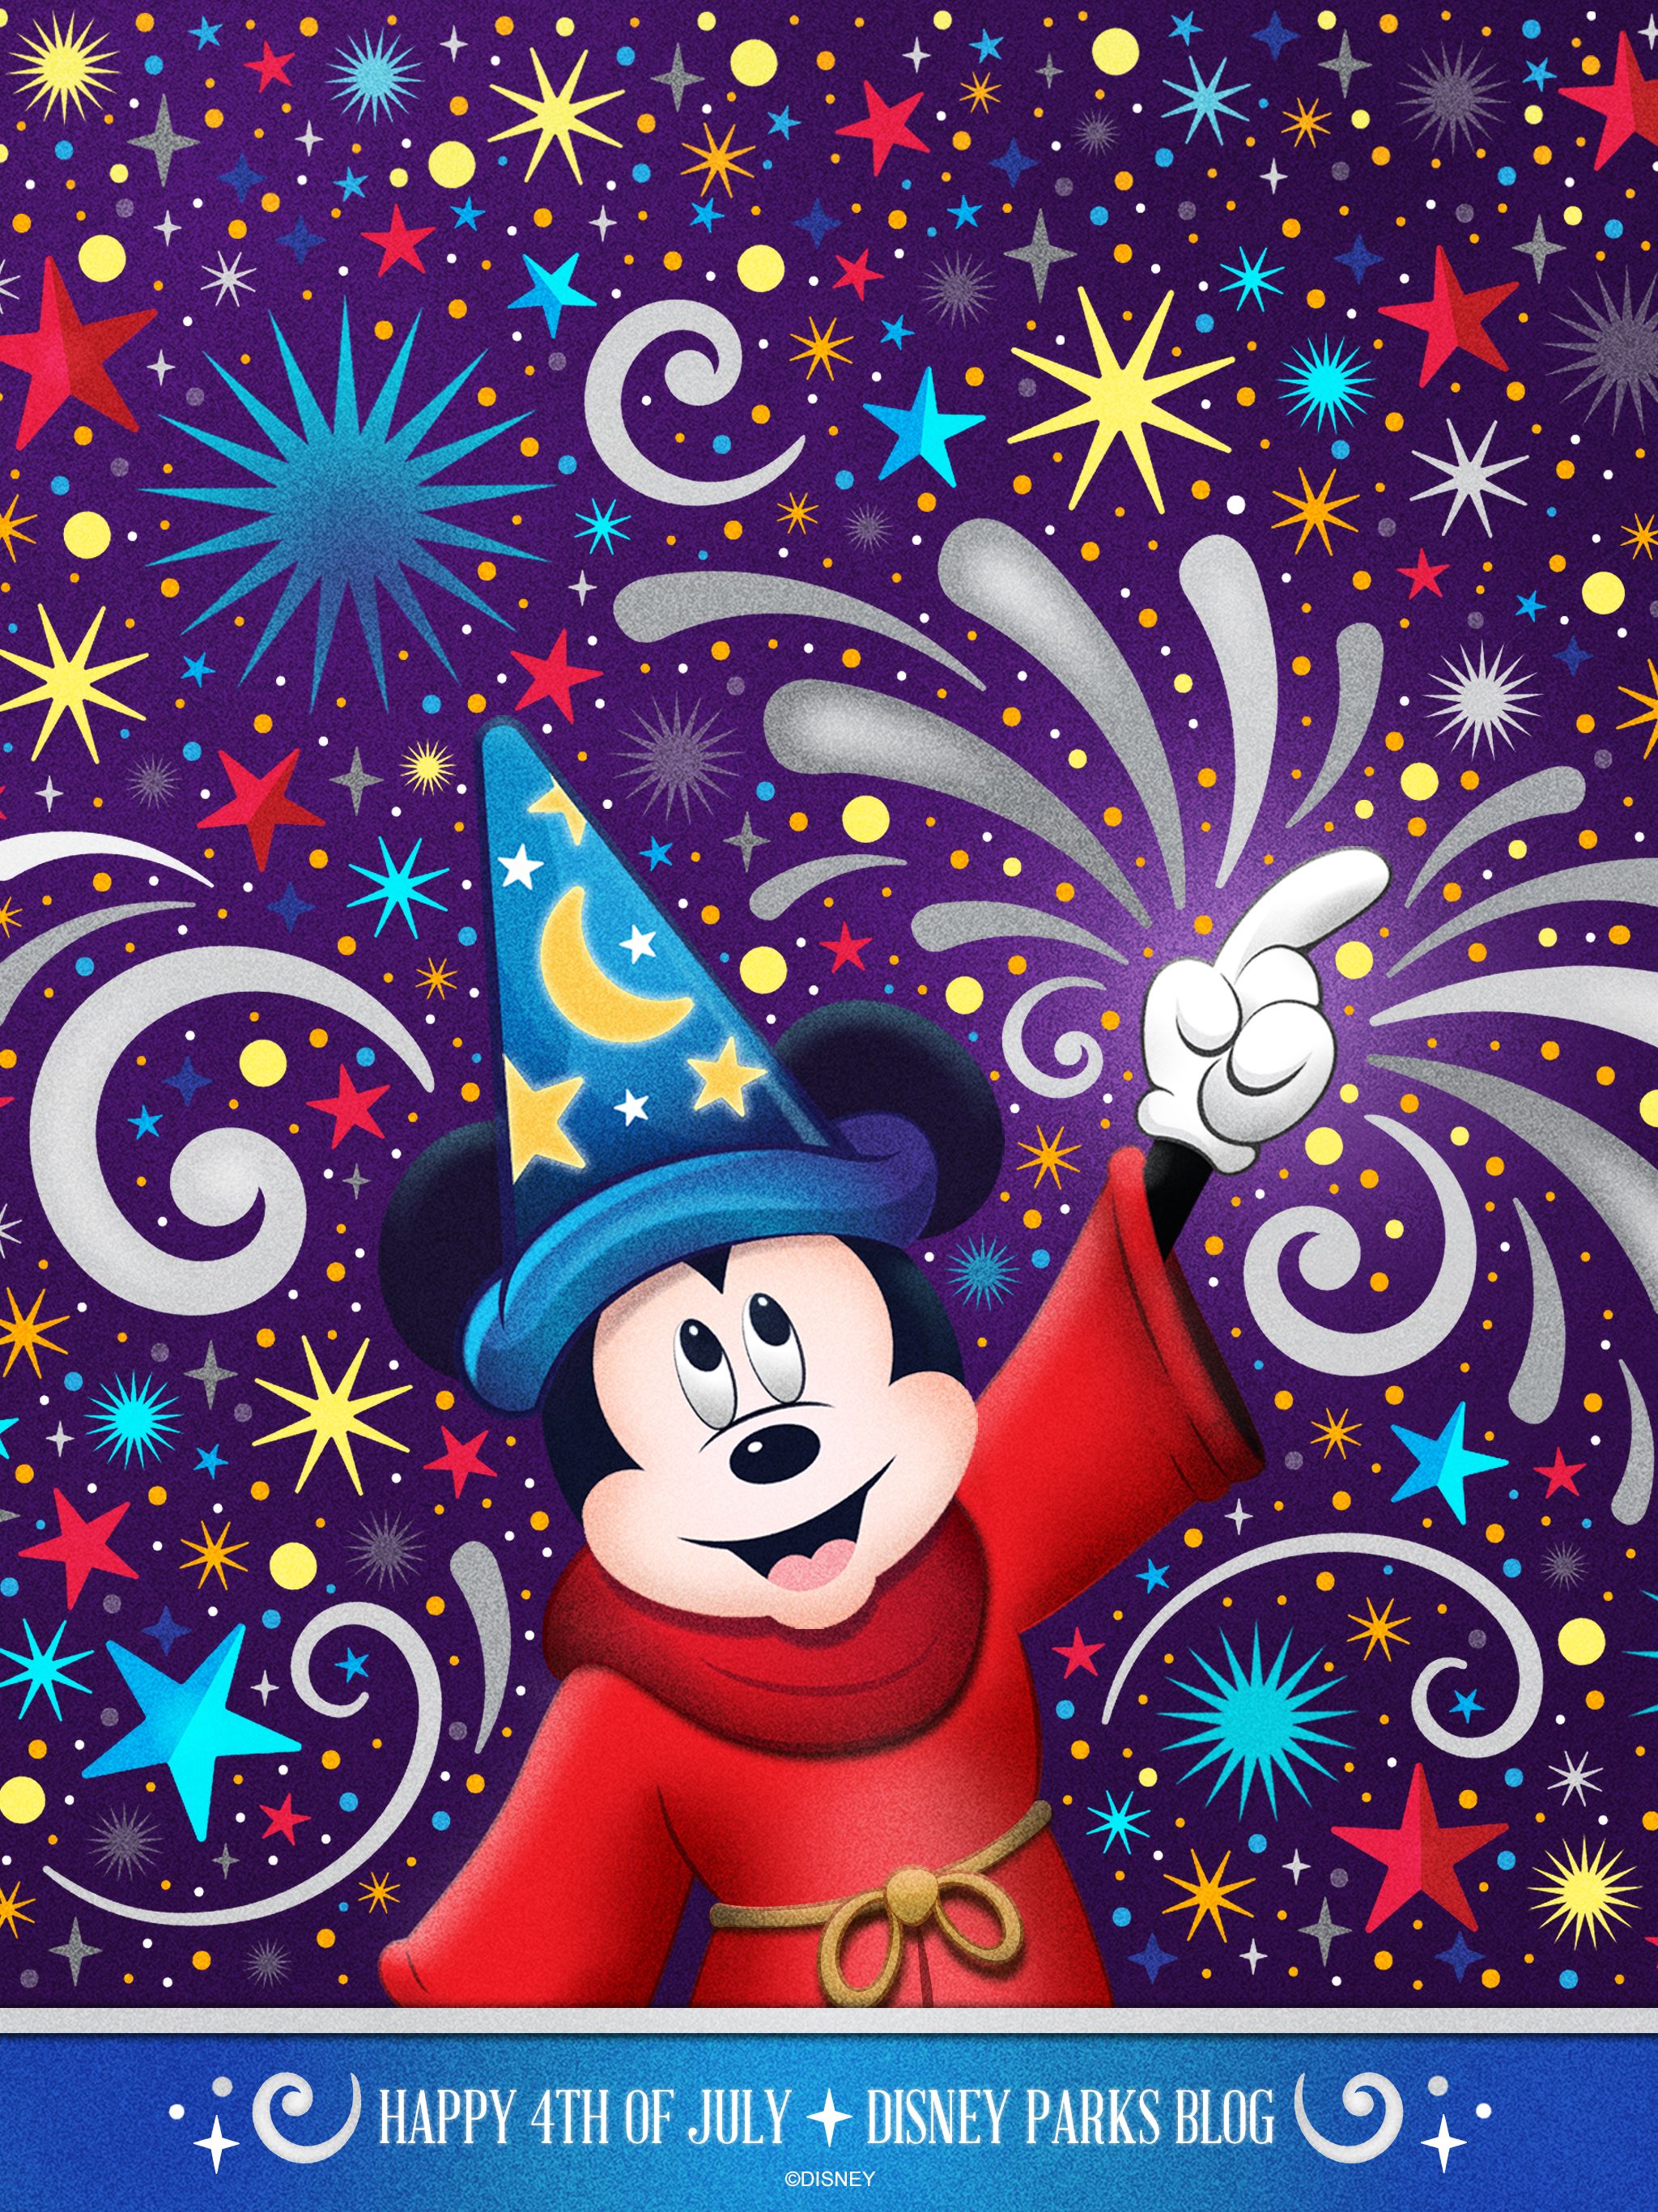 Disney 4Th Of July Images Wallpapers